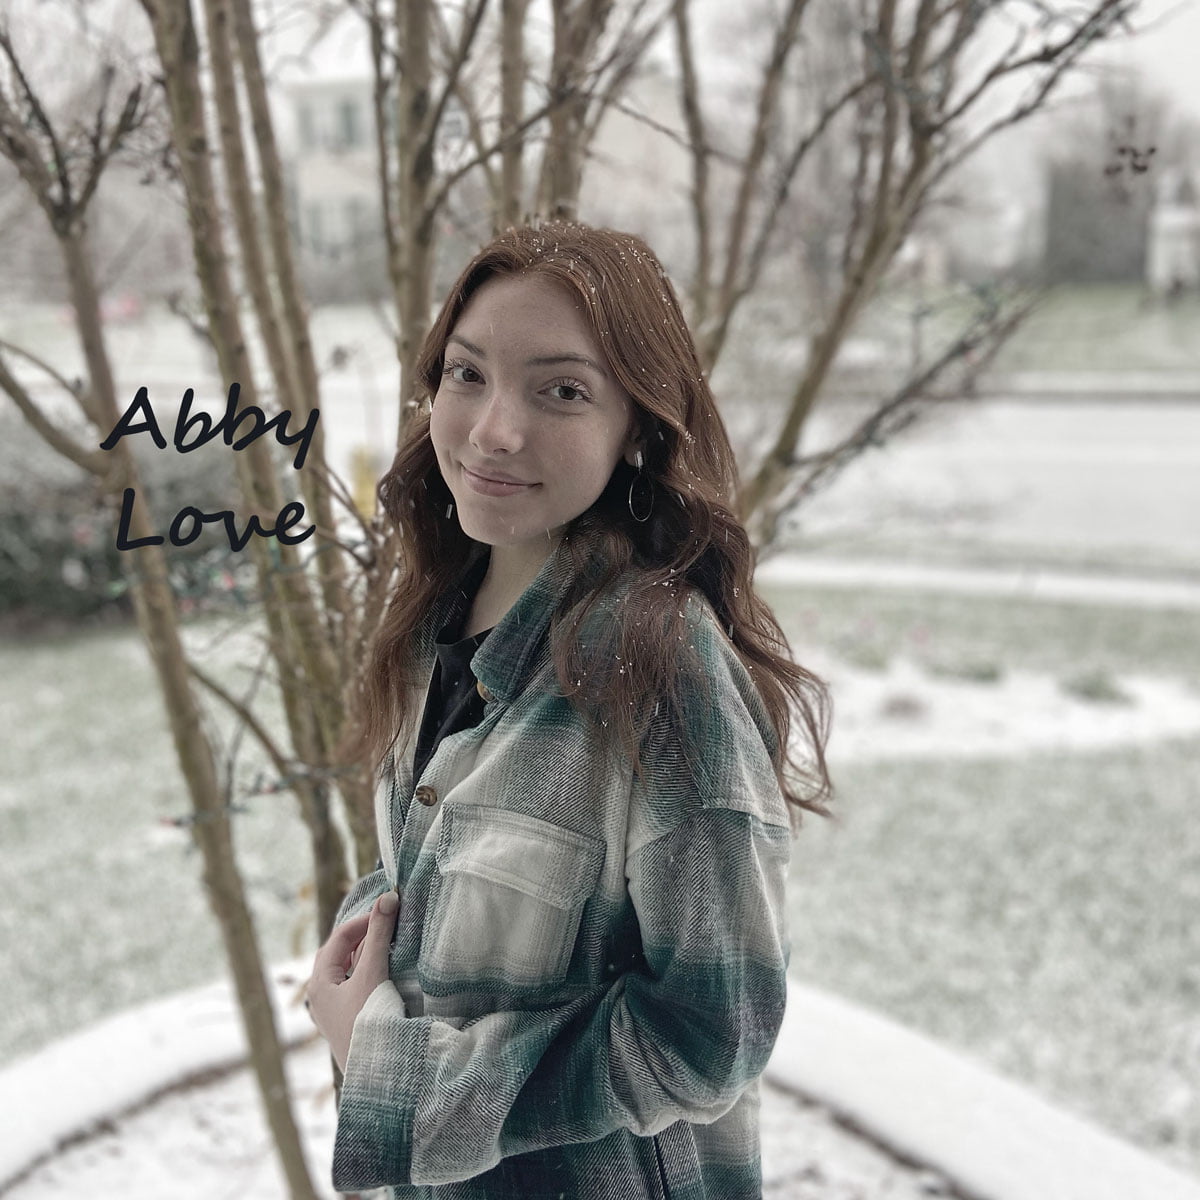 Abby Love – Have Yourself a Merry Little Christmas